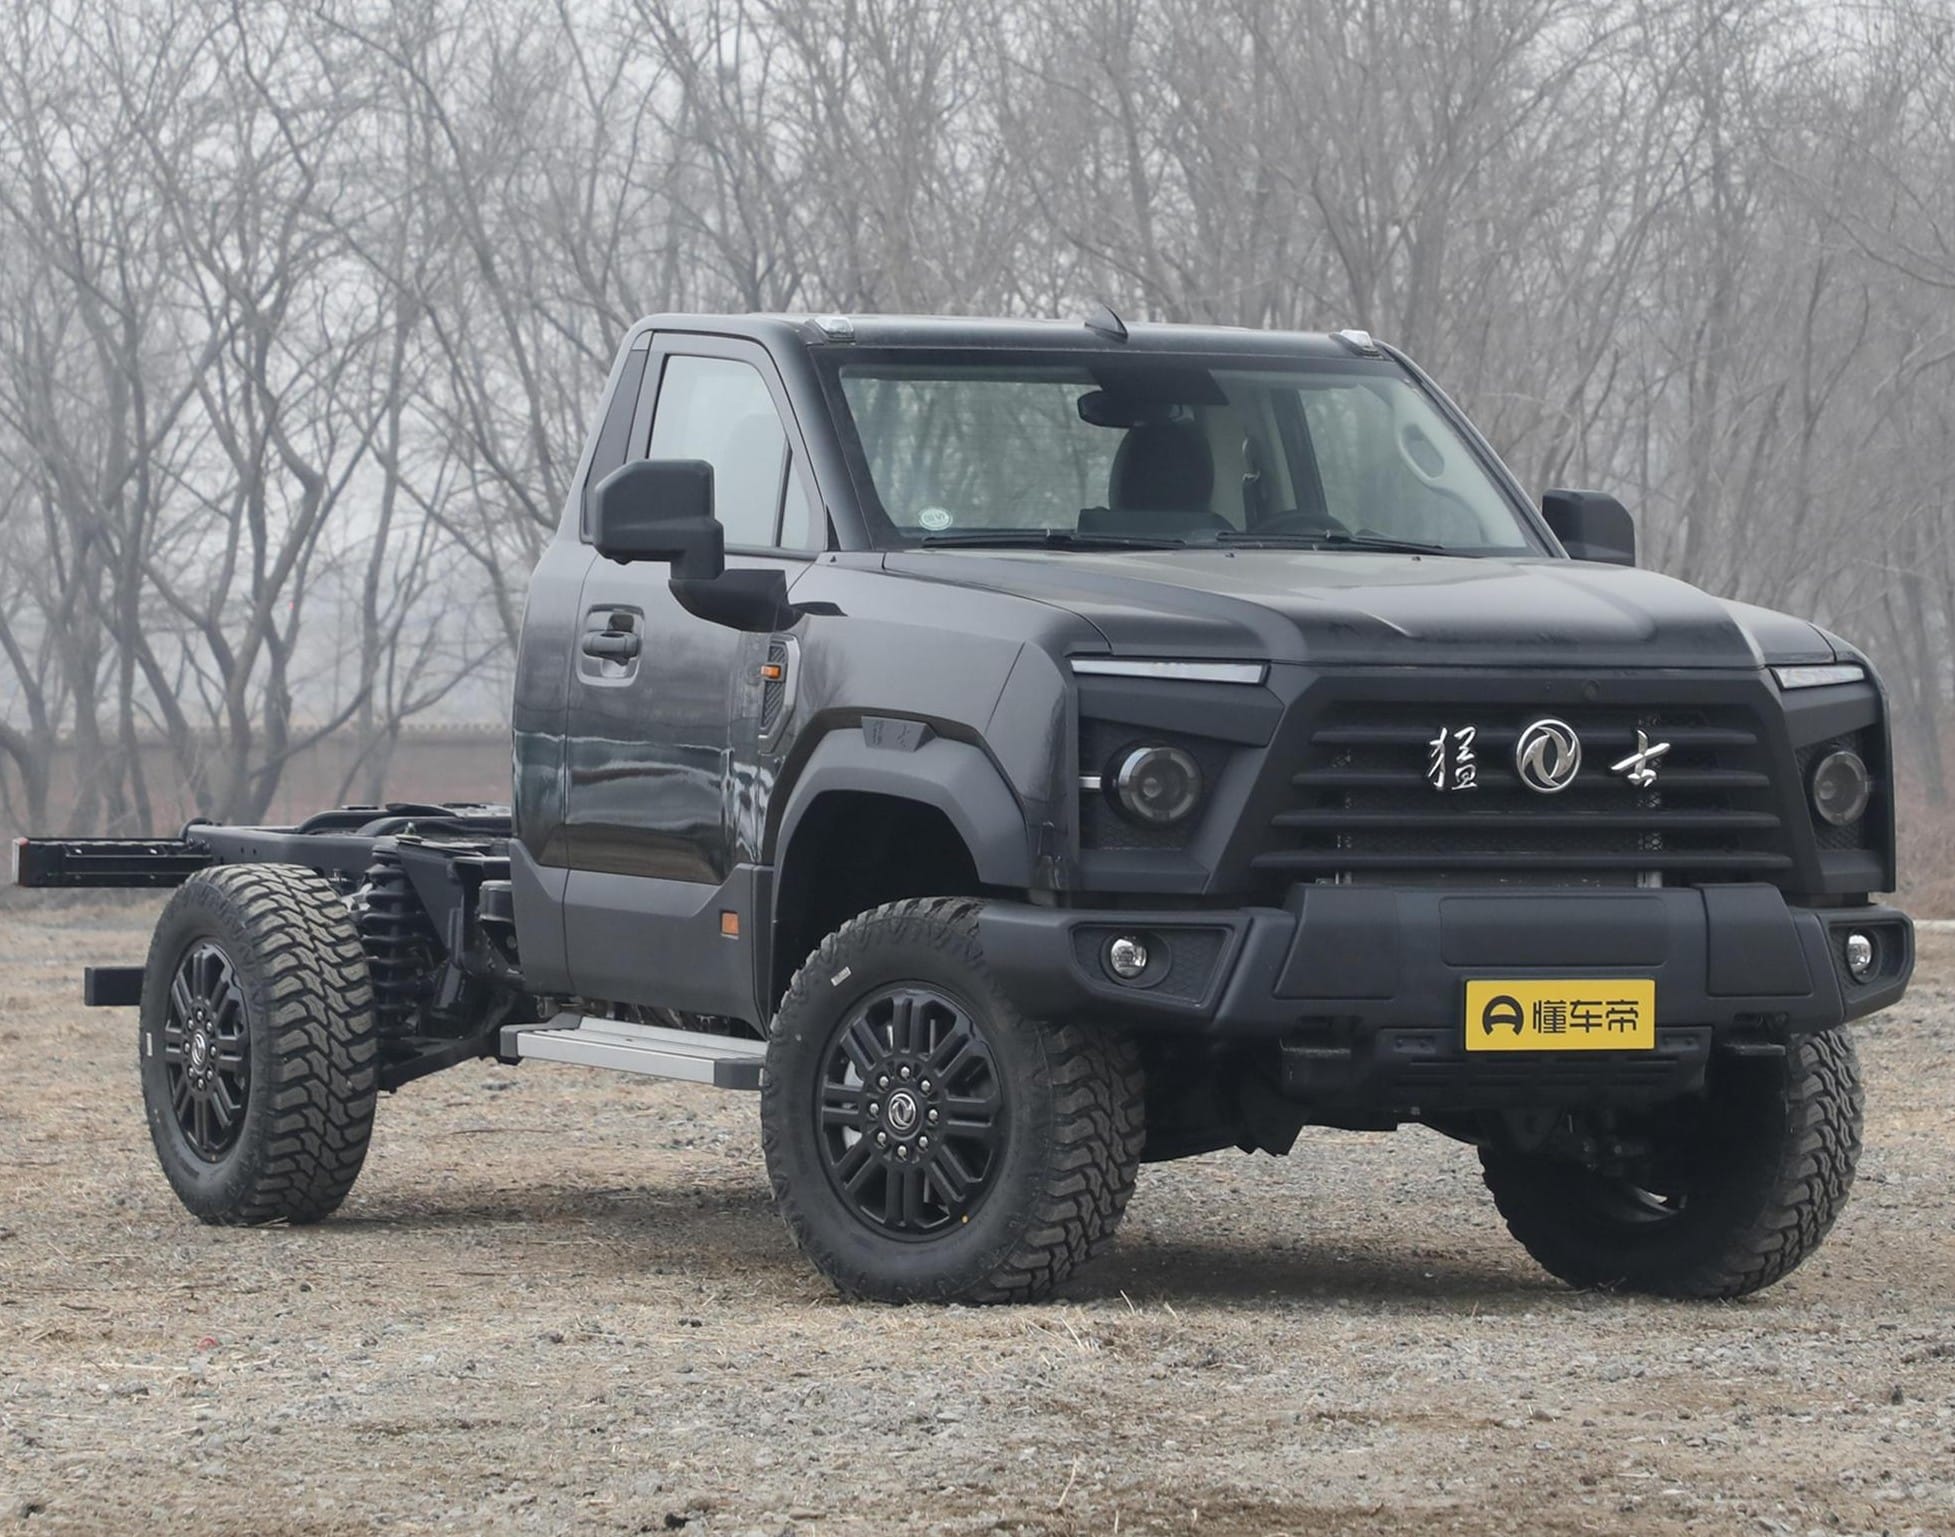 Dongfeng Warrior MS600 Is A Massive Chassis Cab Truck For China With A 6.7 Liter Engine